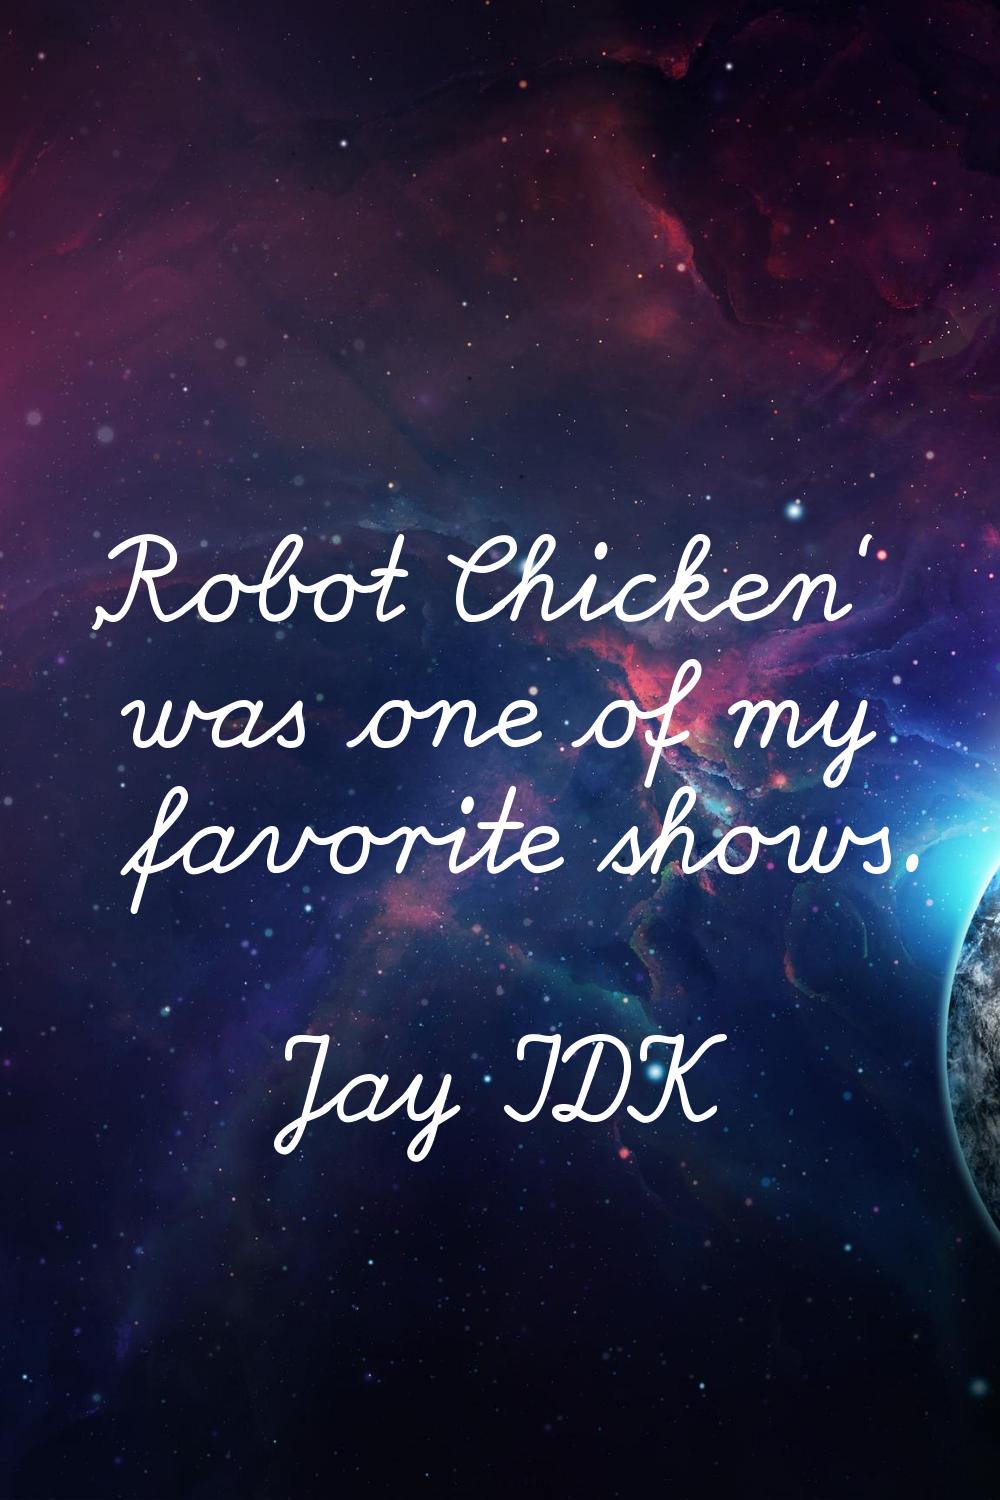 'Robot Chicken' was one of my favorite shows.